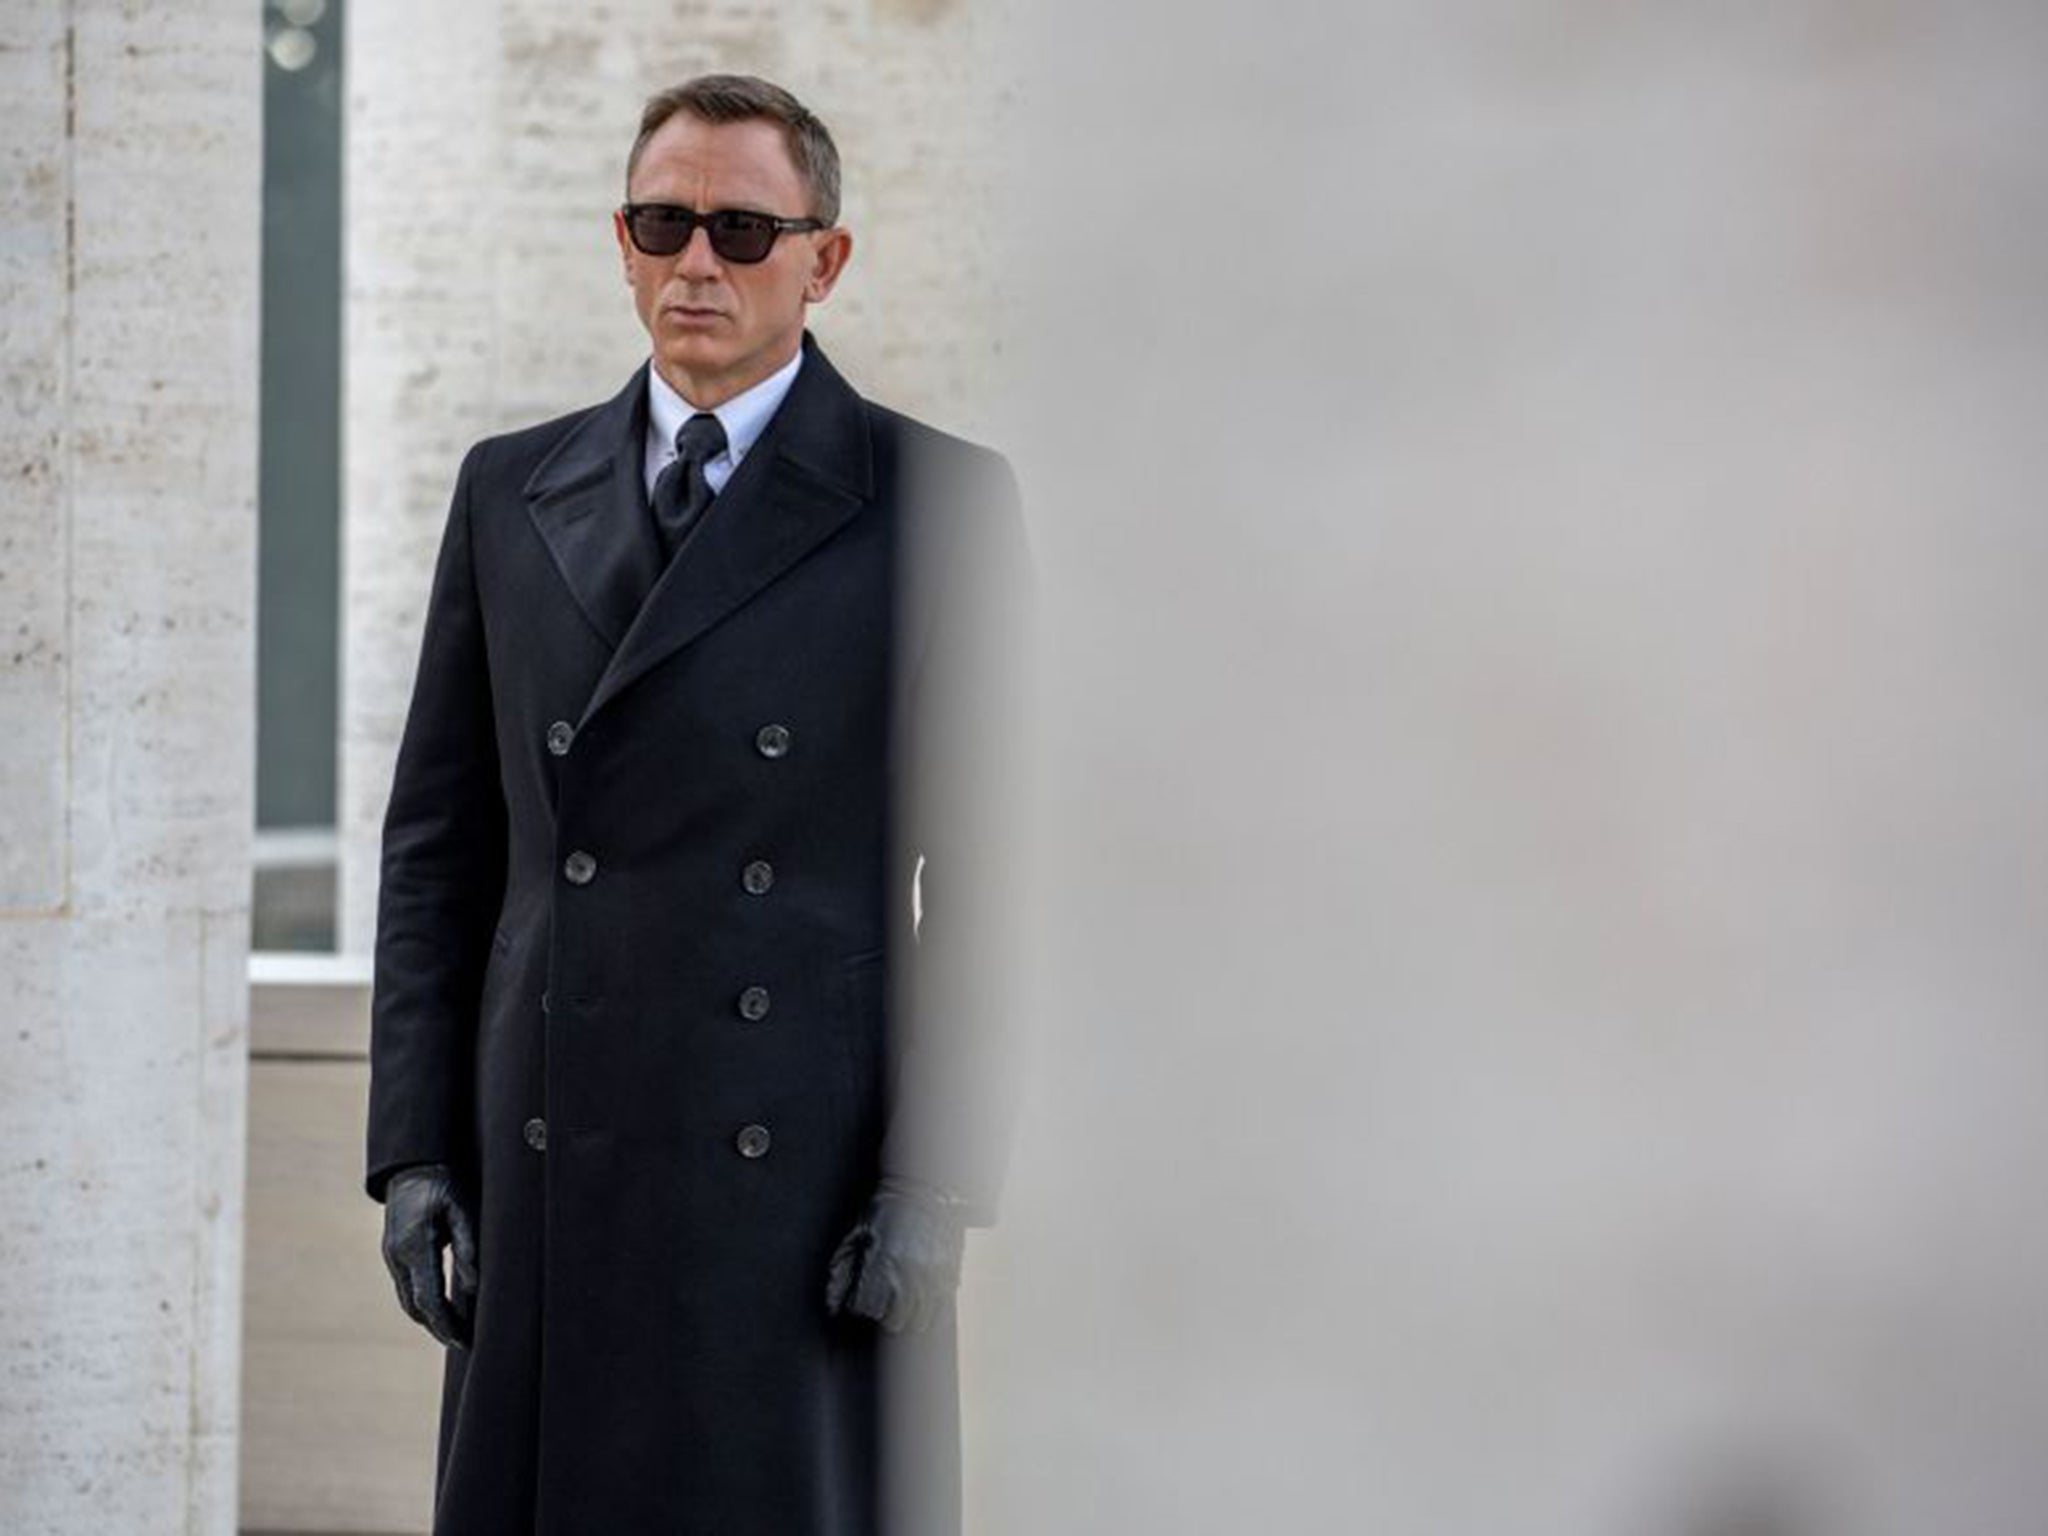 Daniel Craig in a scene from Spectre, released in the UK on 23 October